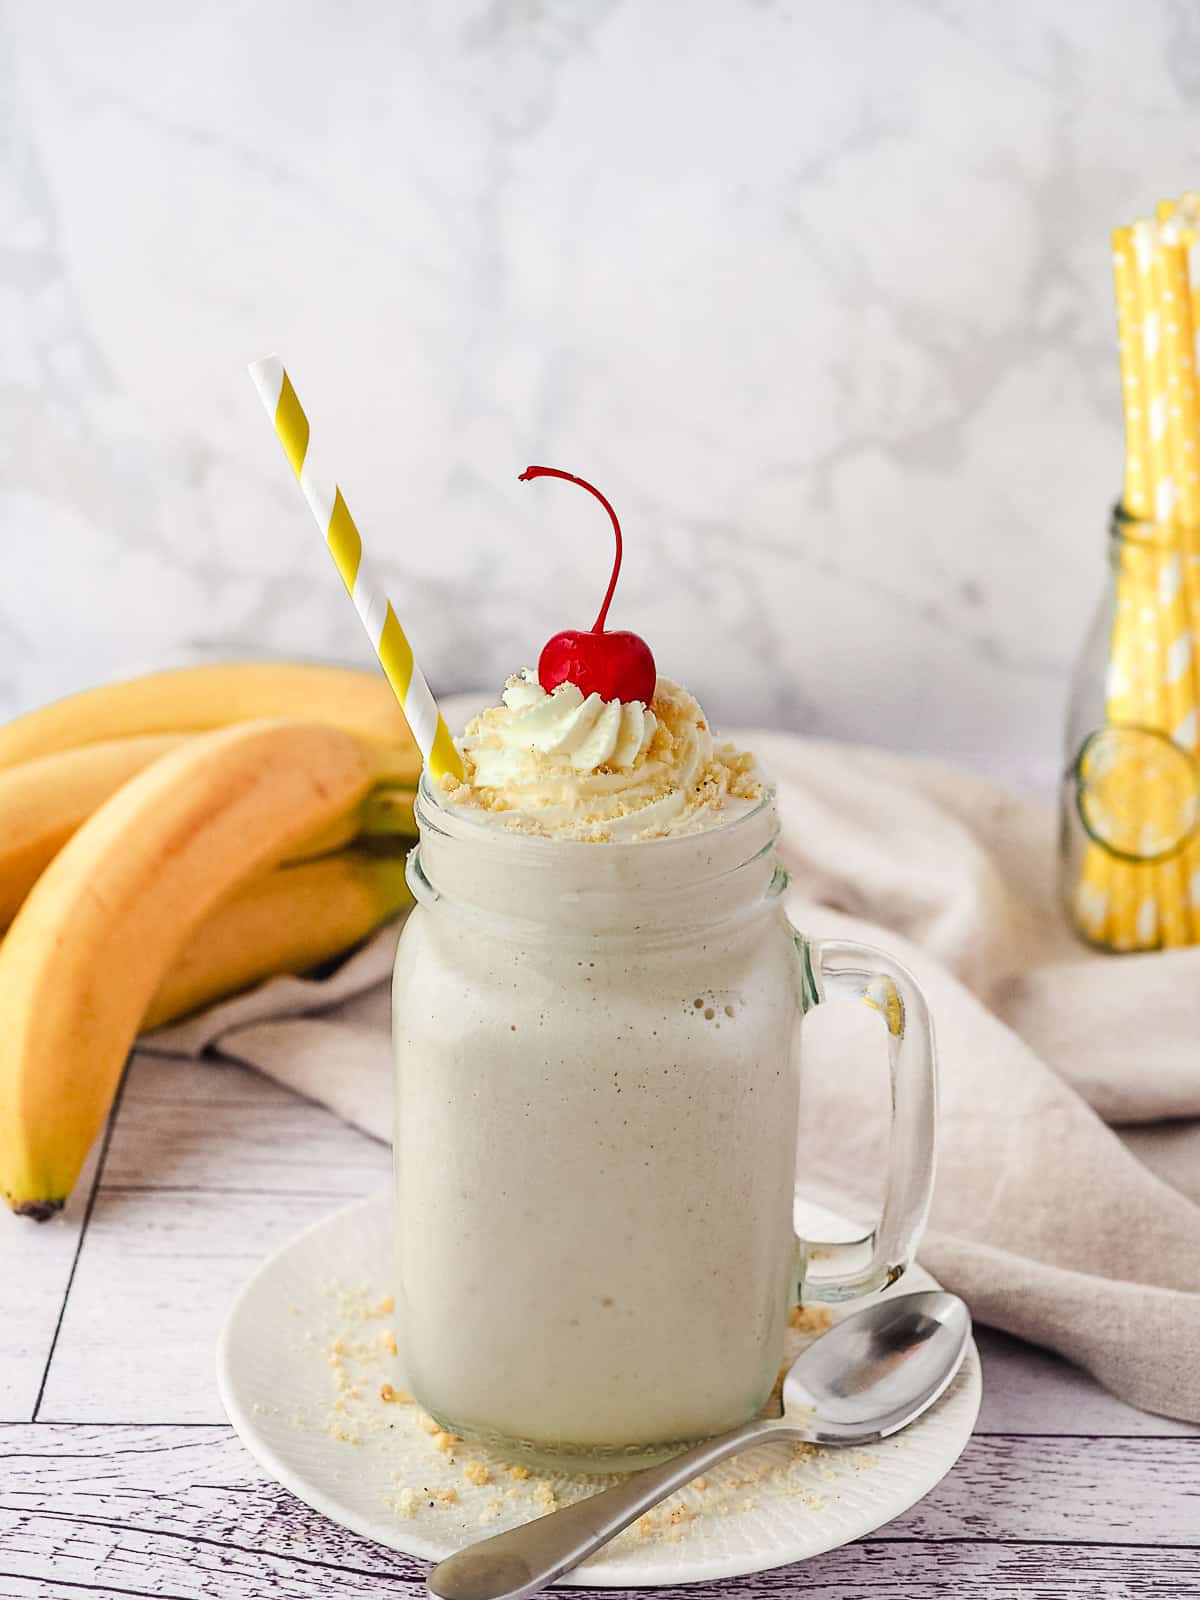 Milkshake with a straw, whipped cream, banana chip crumbs and a cherry on top, with fresh bananas and jar of straws in background.